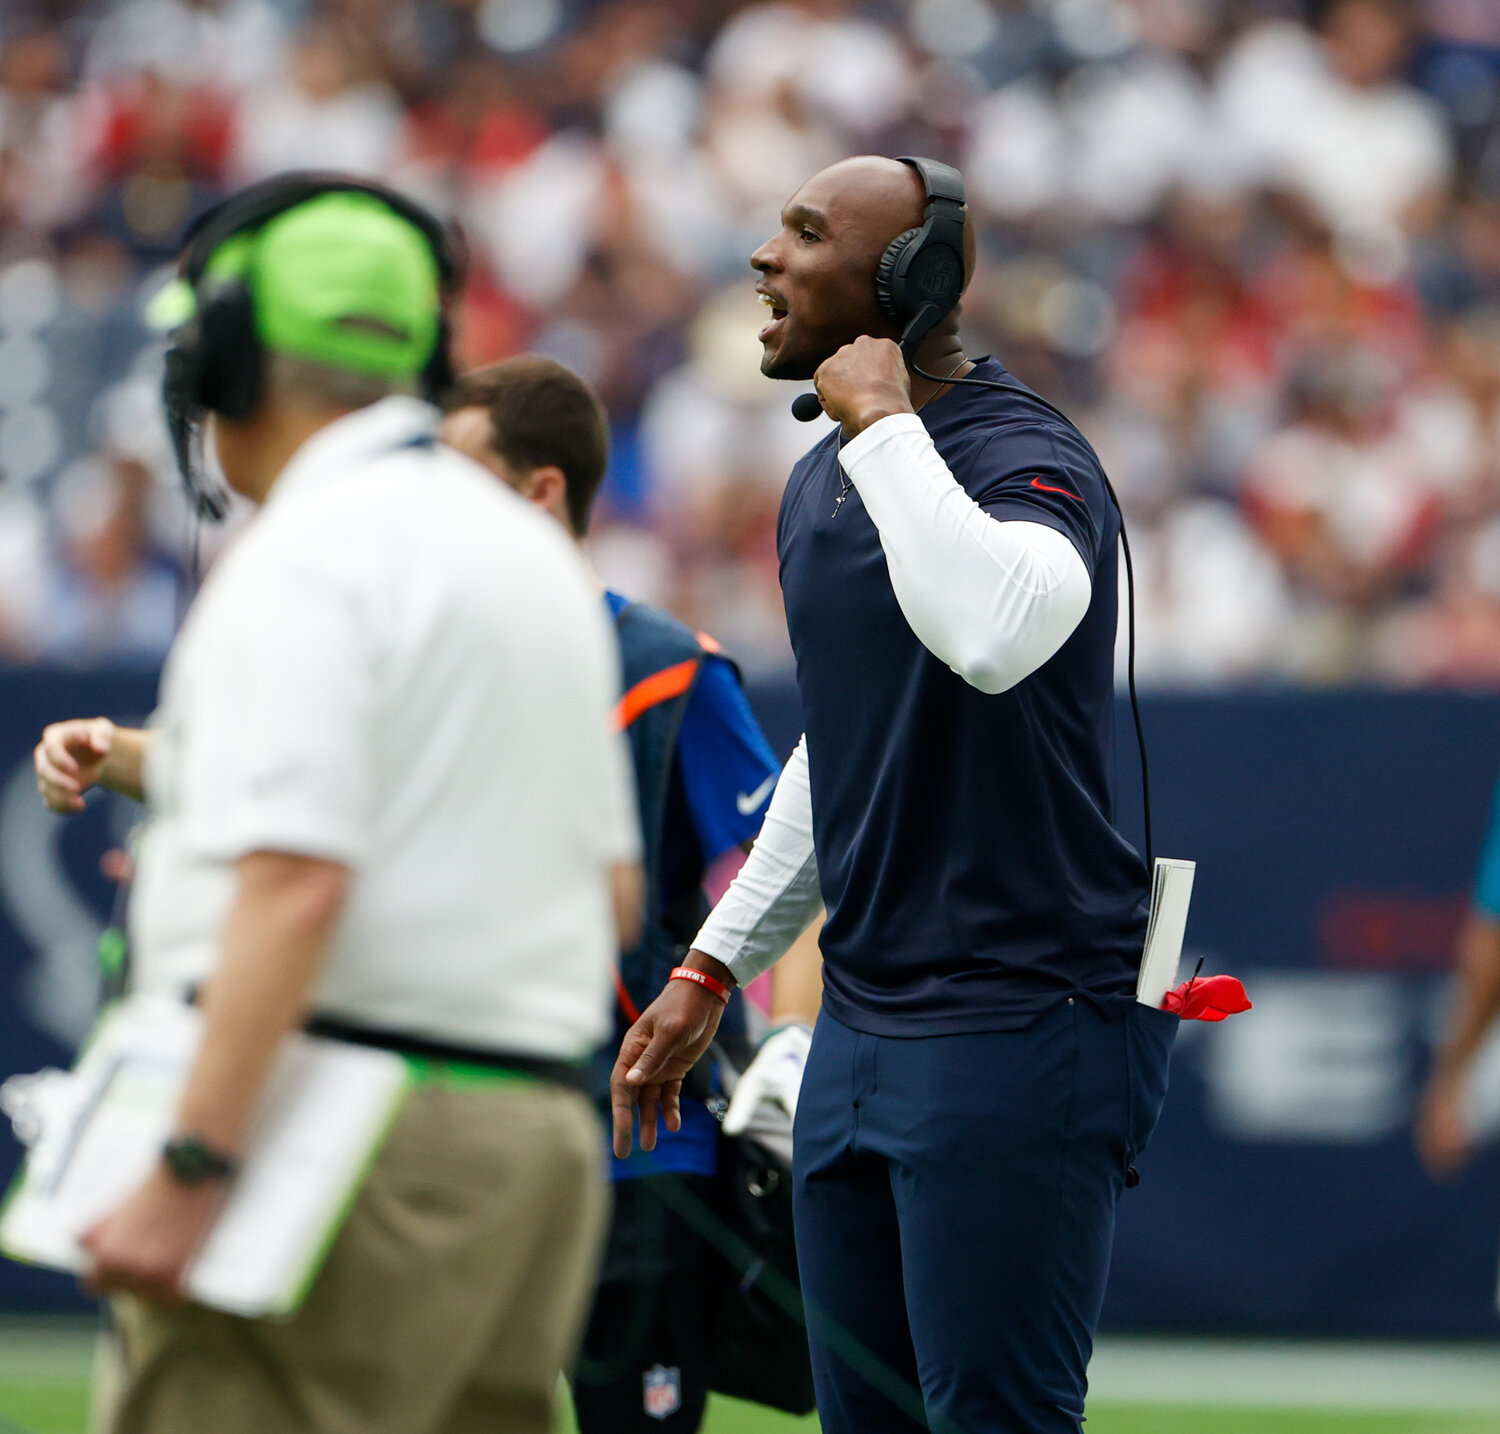 Houston Texans head coach DeMeco Ryans during an NFL game between the Texans and the Colts on September 17, 2023 in Houston. The Colts won, 31-20.